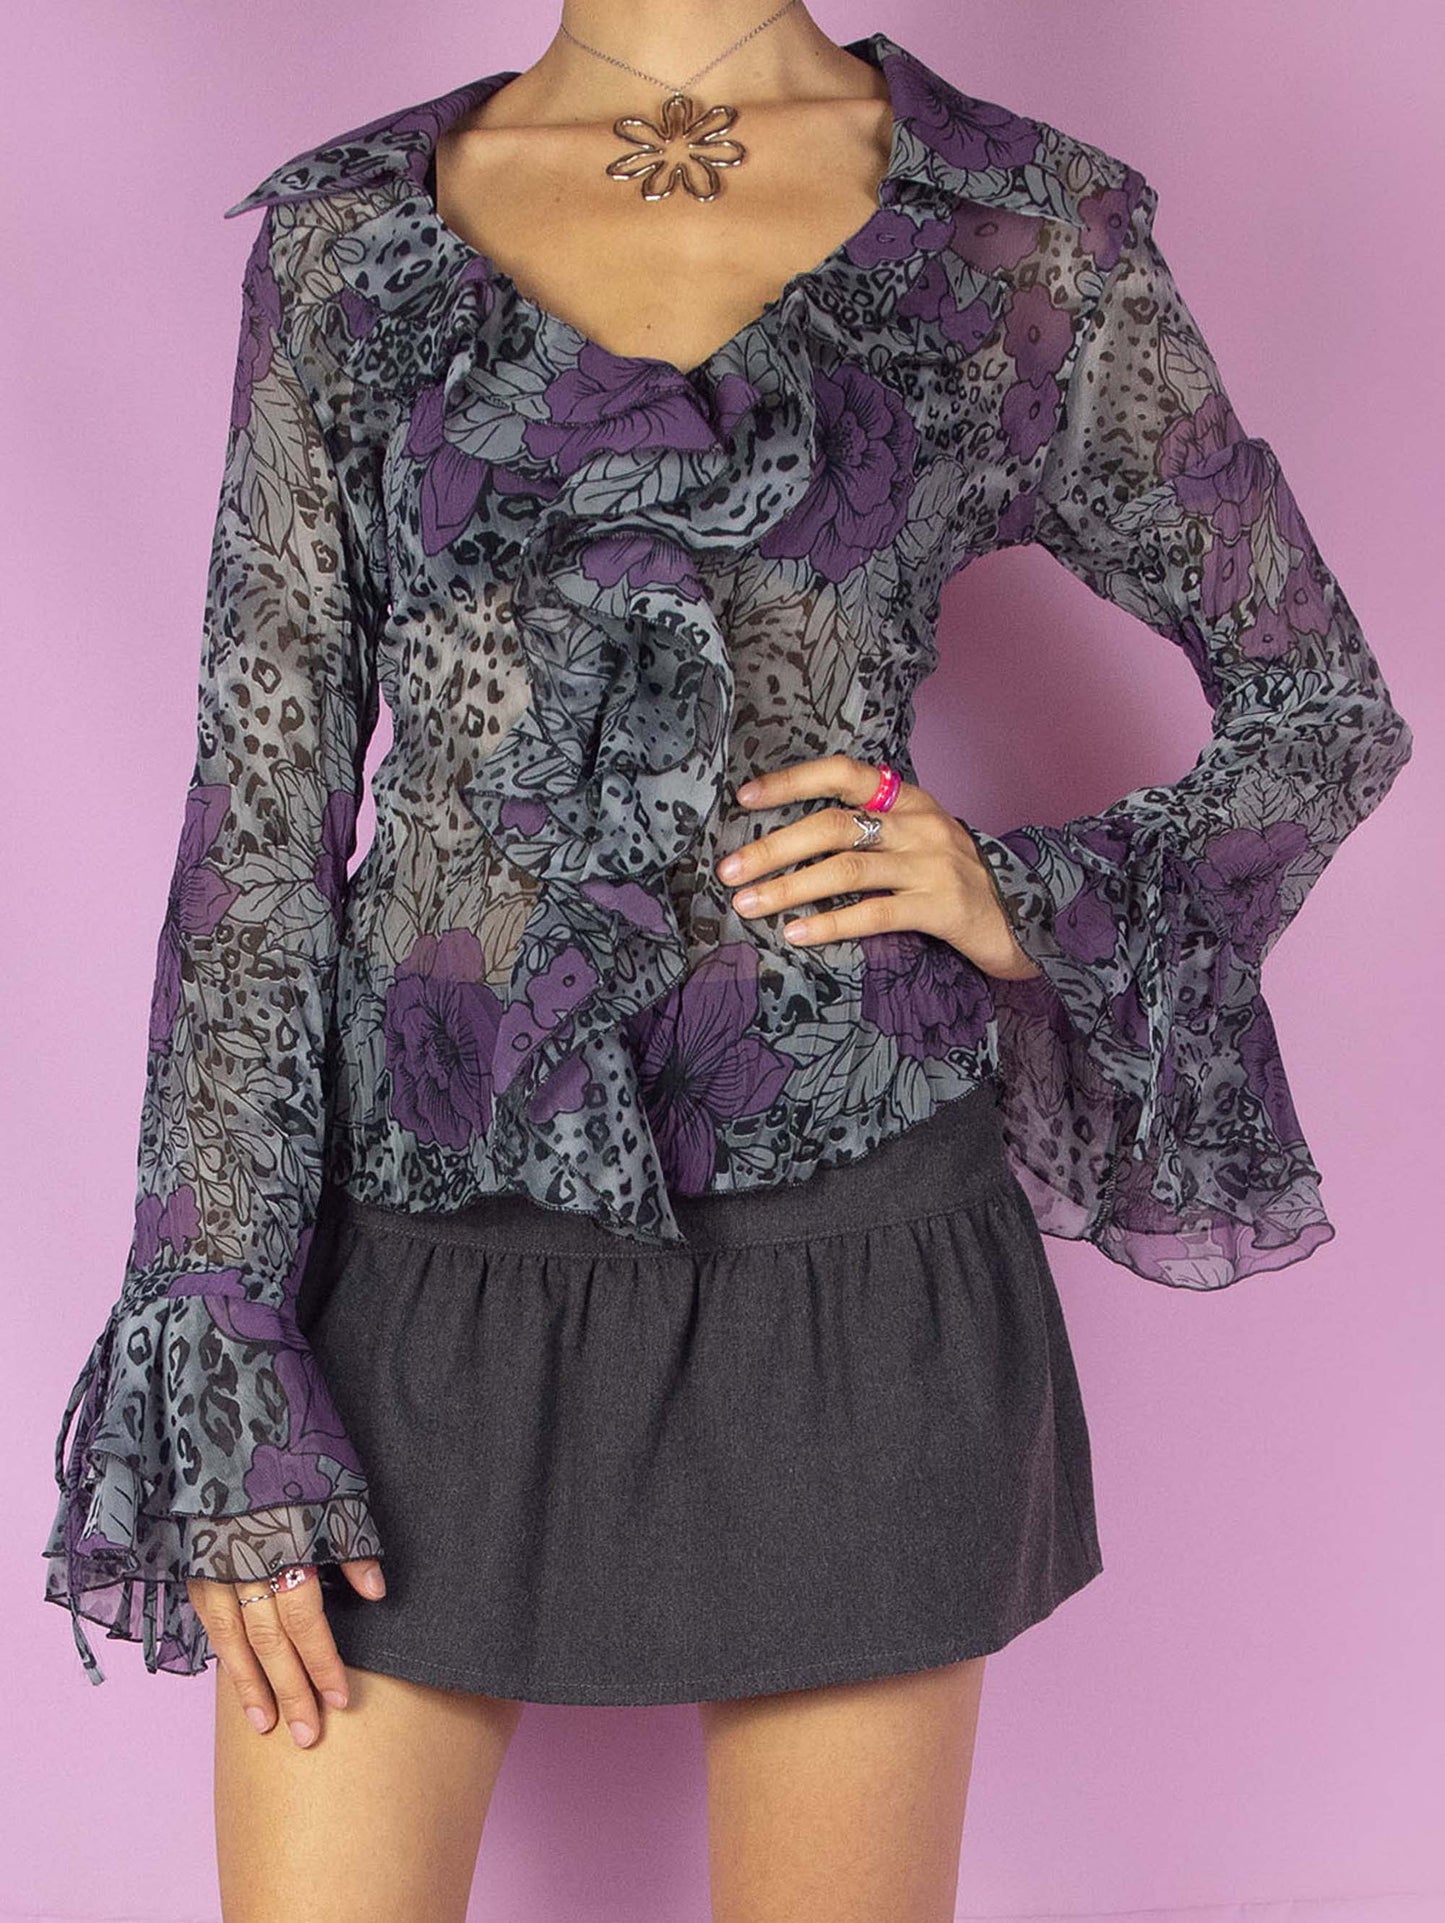 The Y2K Sheer Ruffle Blouse is a vintage romantic 2000s top featuring a semi-transparent gray, black, and purple floral and leopard animal print pattern. It has a V-neckline and bell sleeves.